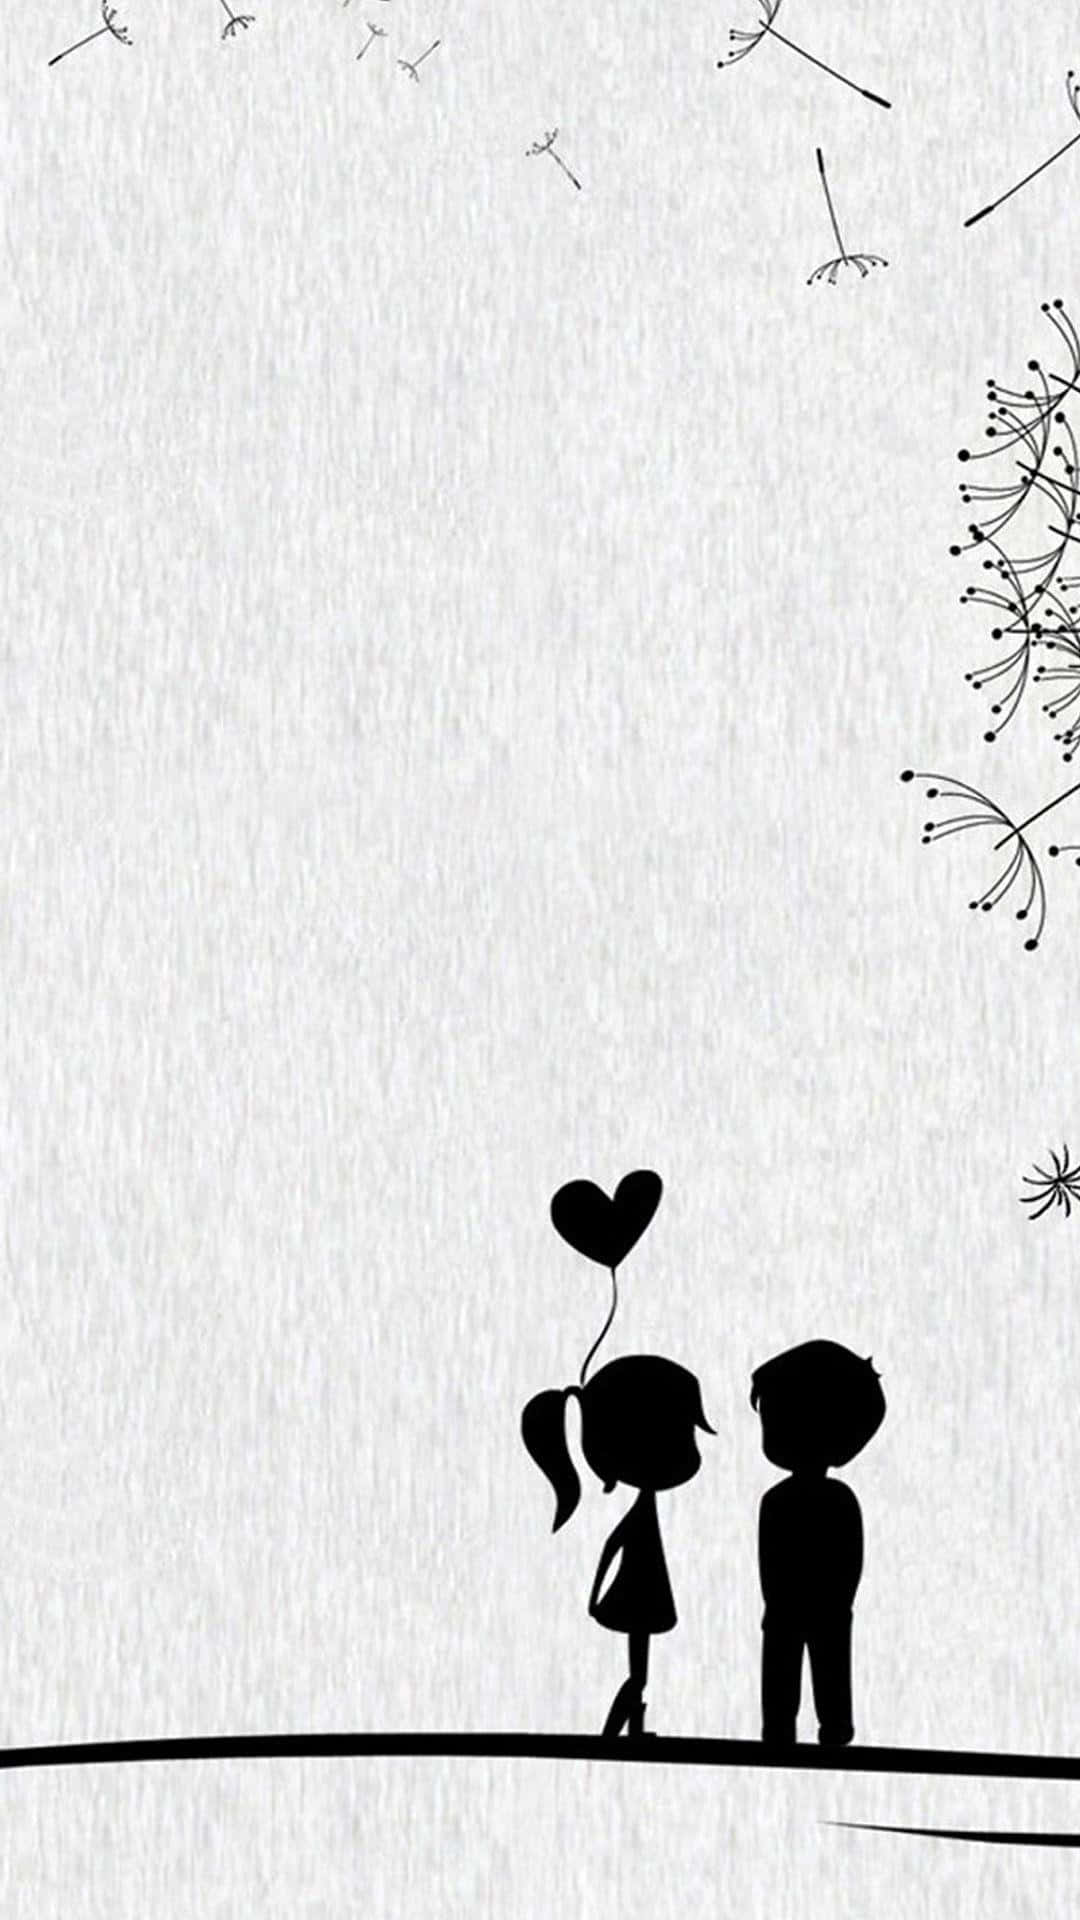 A black couple walking in the park, hand-in-hand Wallpaper